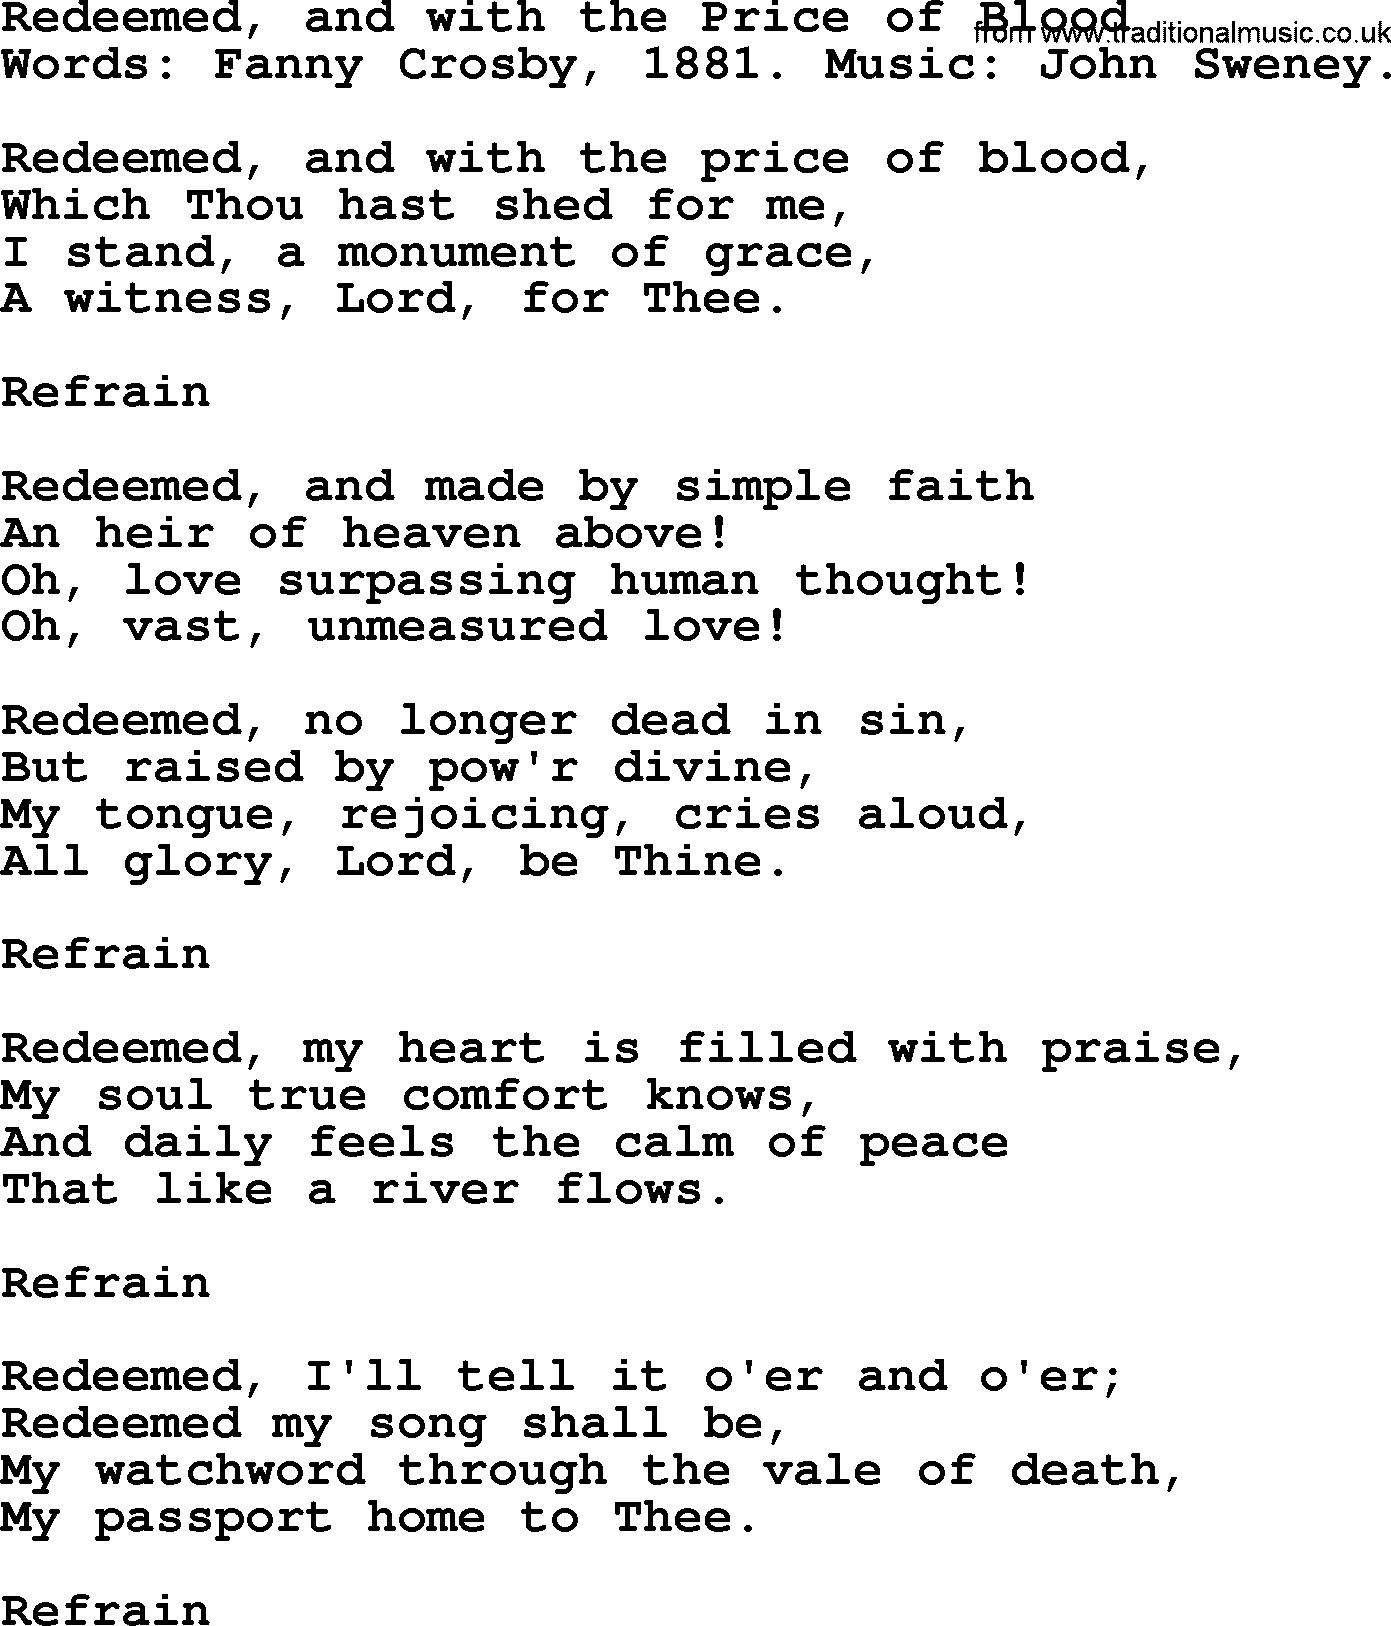 Fanny Crosby song: Redeemed, And With The Price Of Blood, lyrics